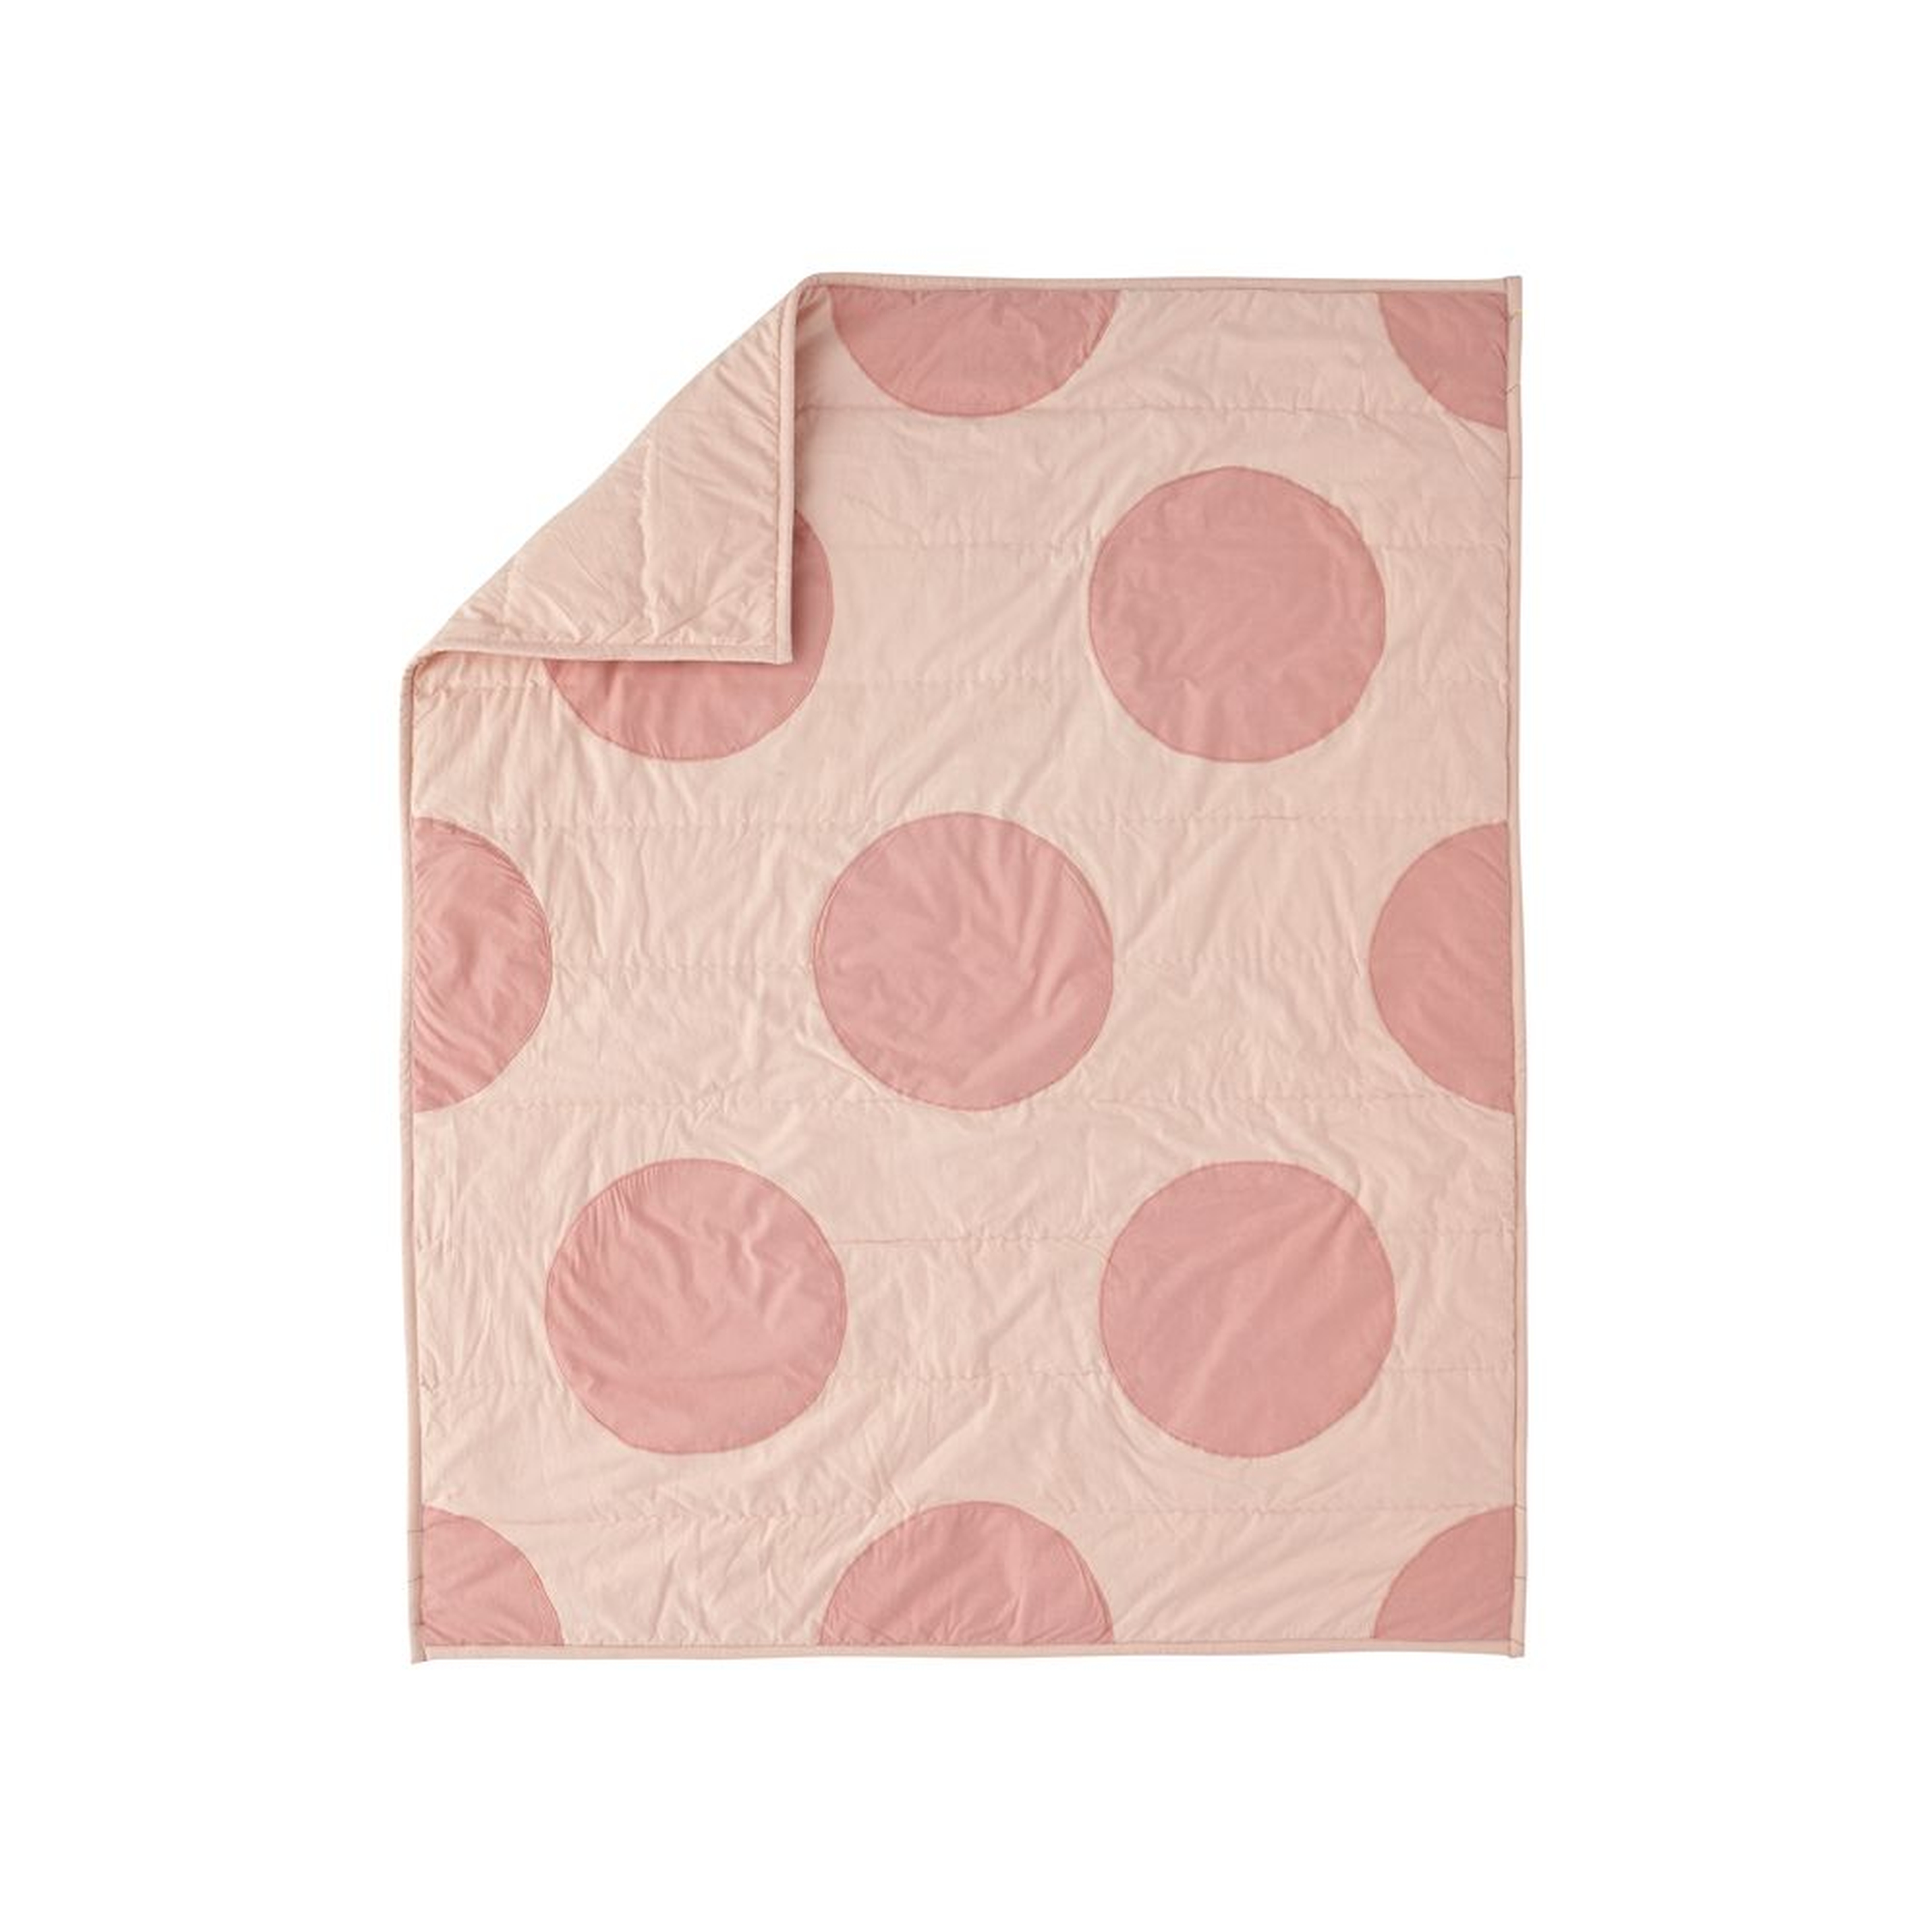 Polka Dot Baby Quilt - Crate and Barrel